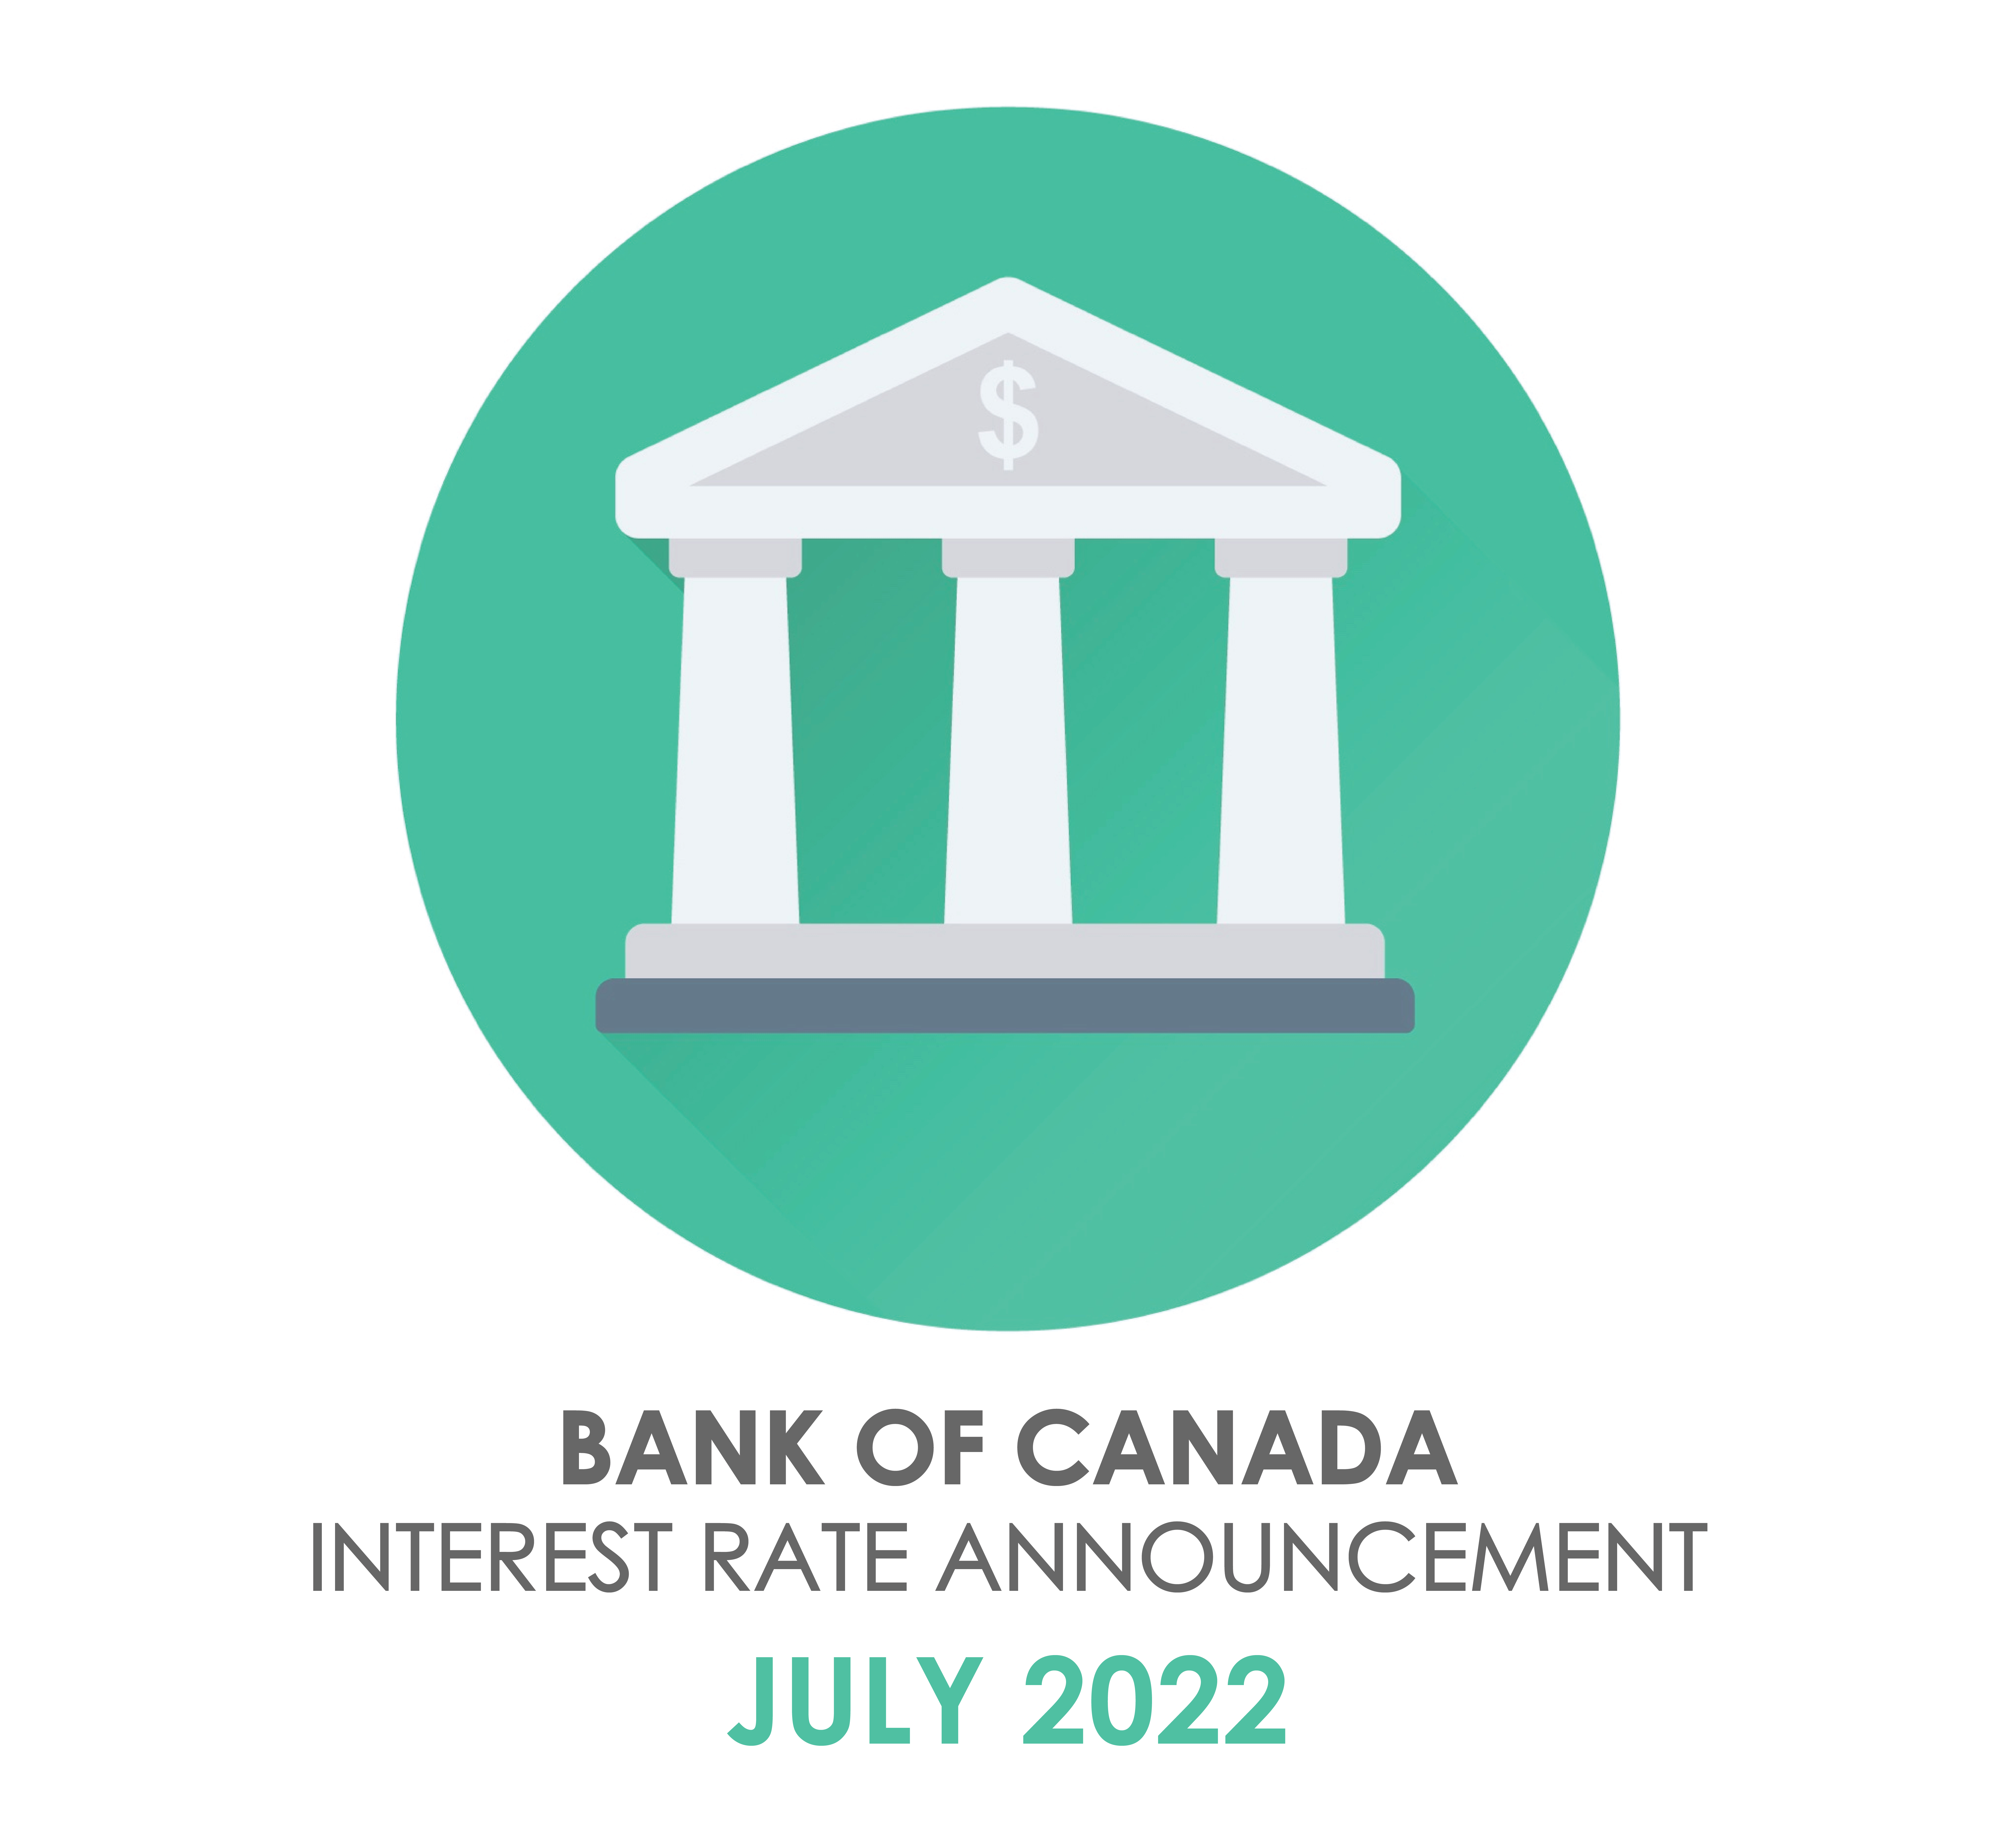 Bank of Canada Announcement - July 2022